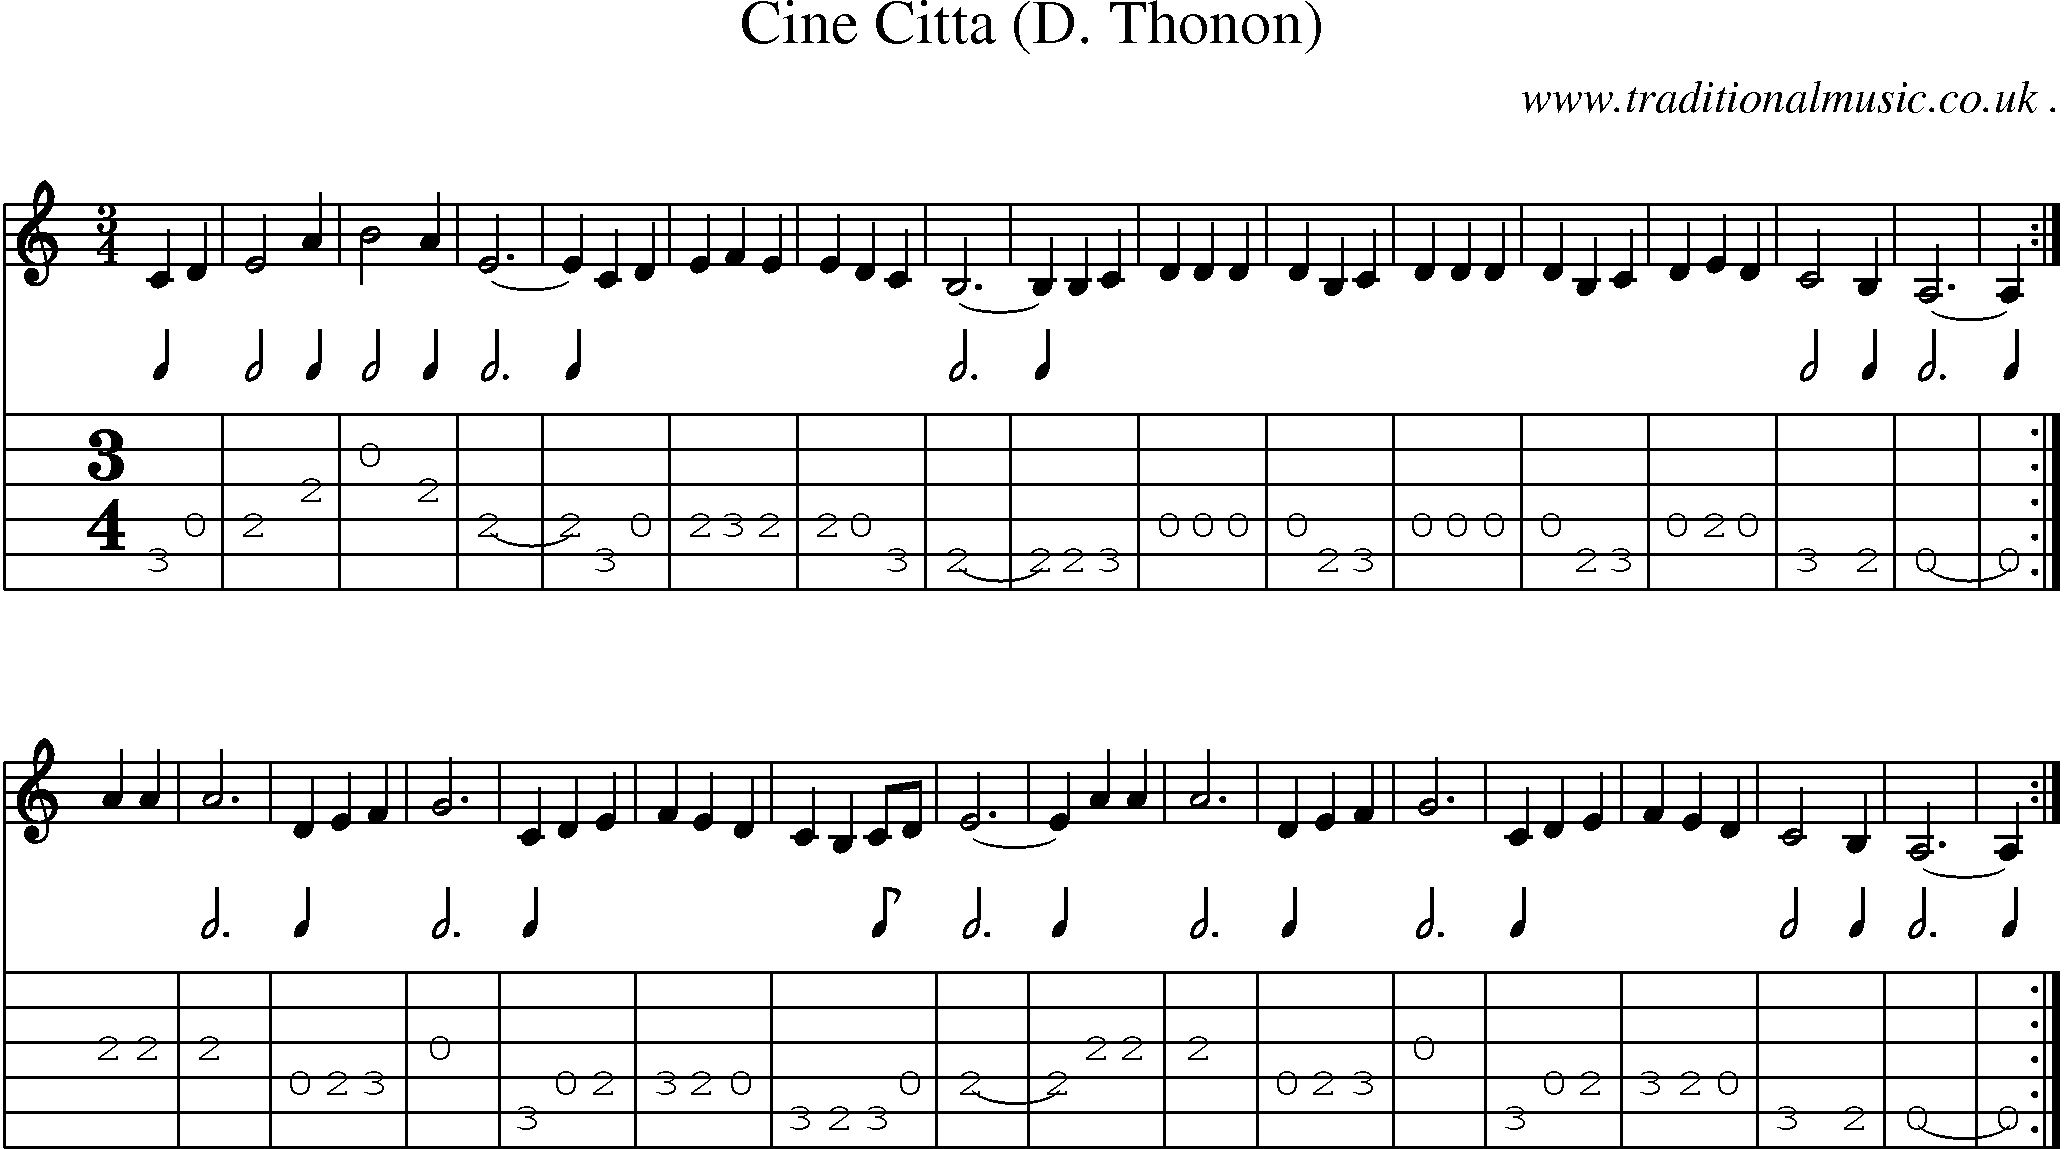 Sheet-Music and Guitar Tabs for Cine Citta (d Thonon)